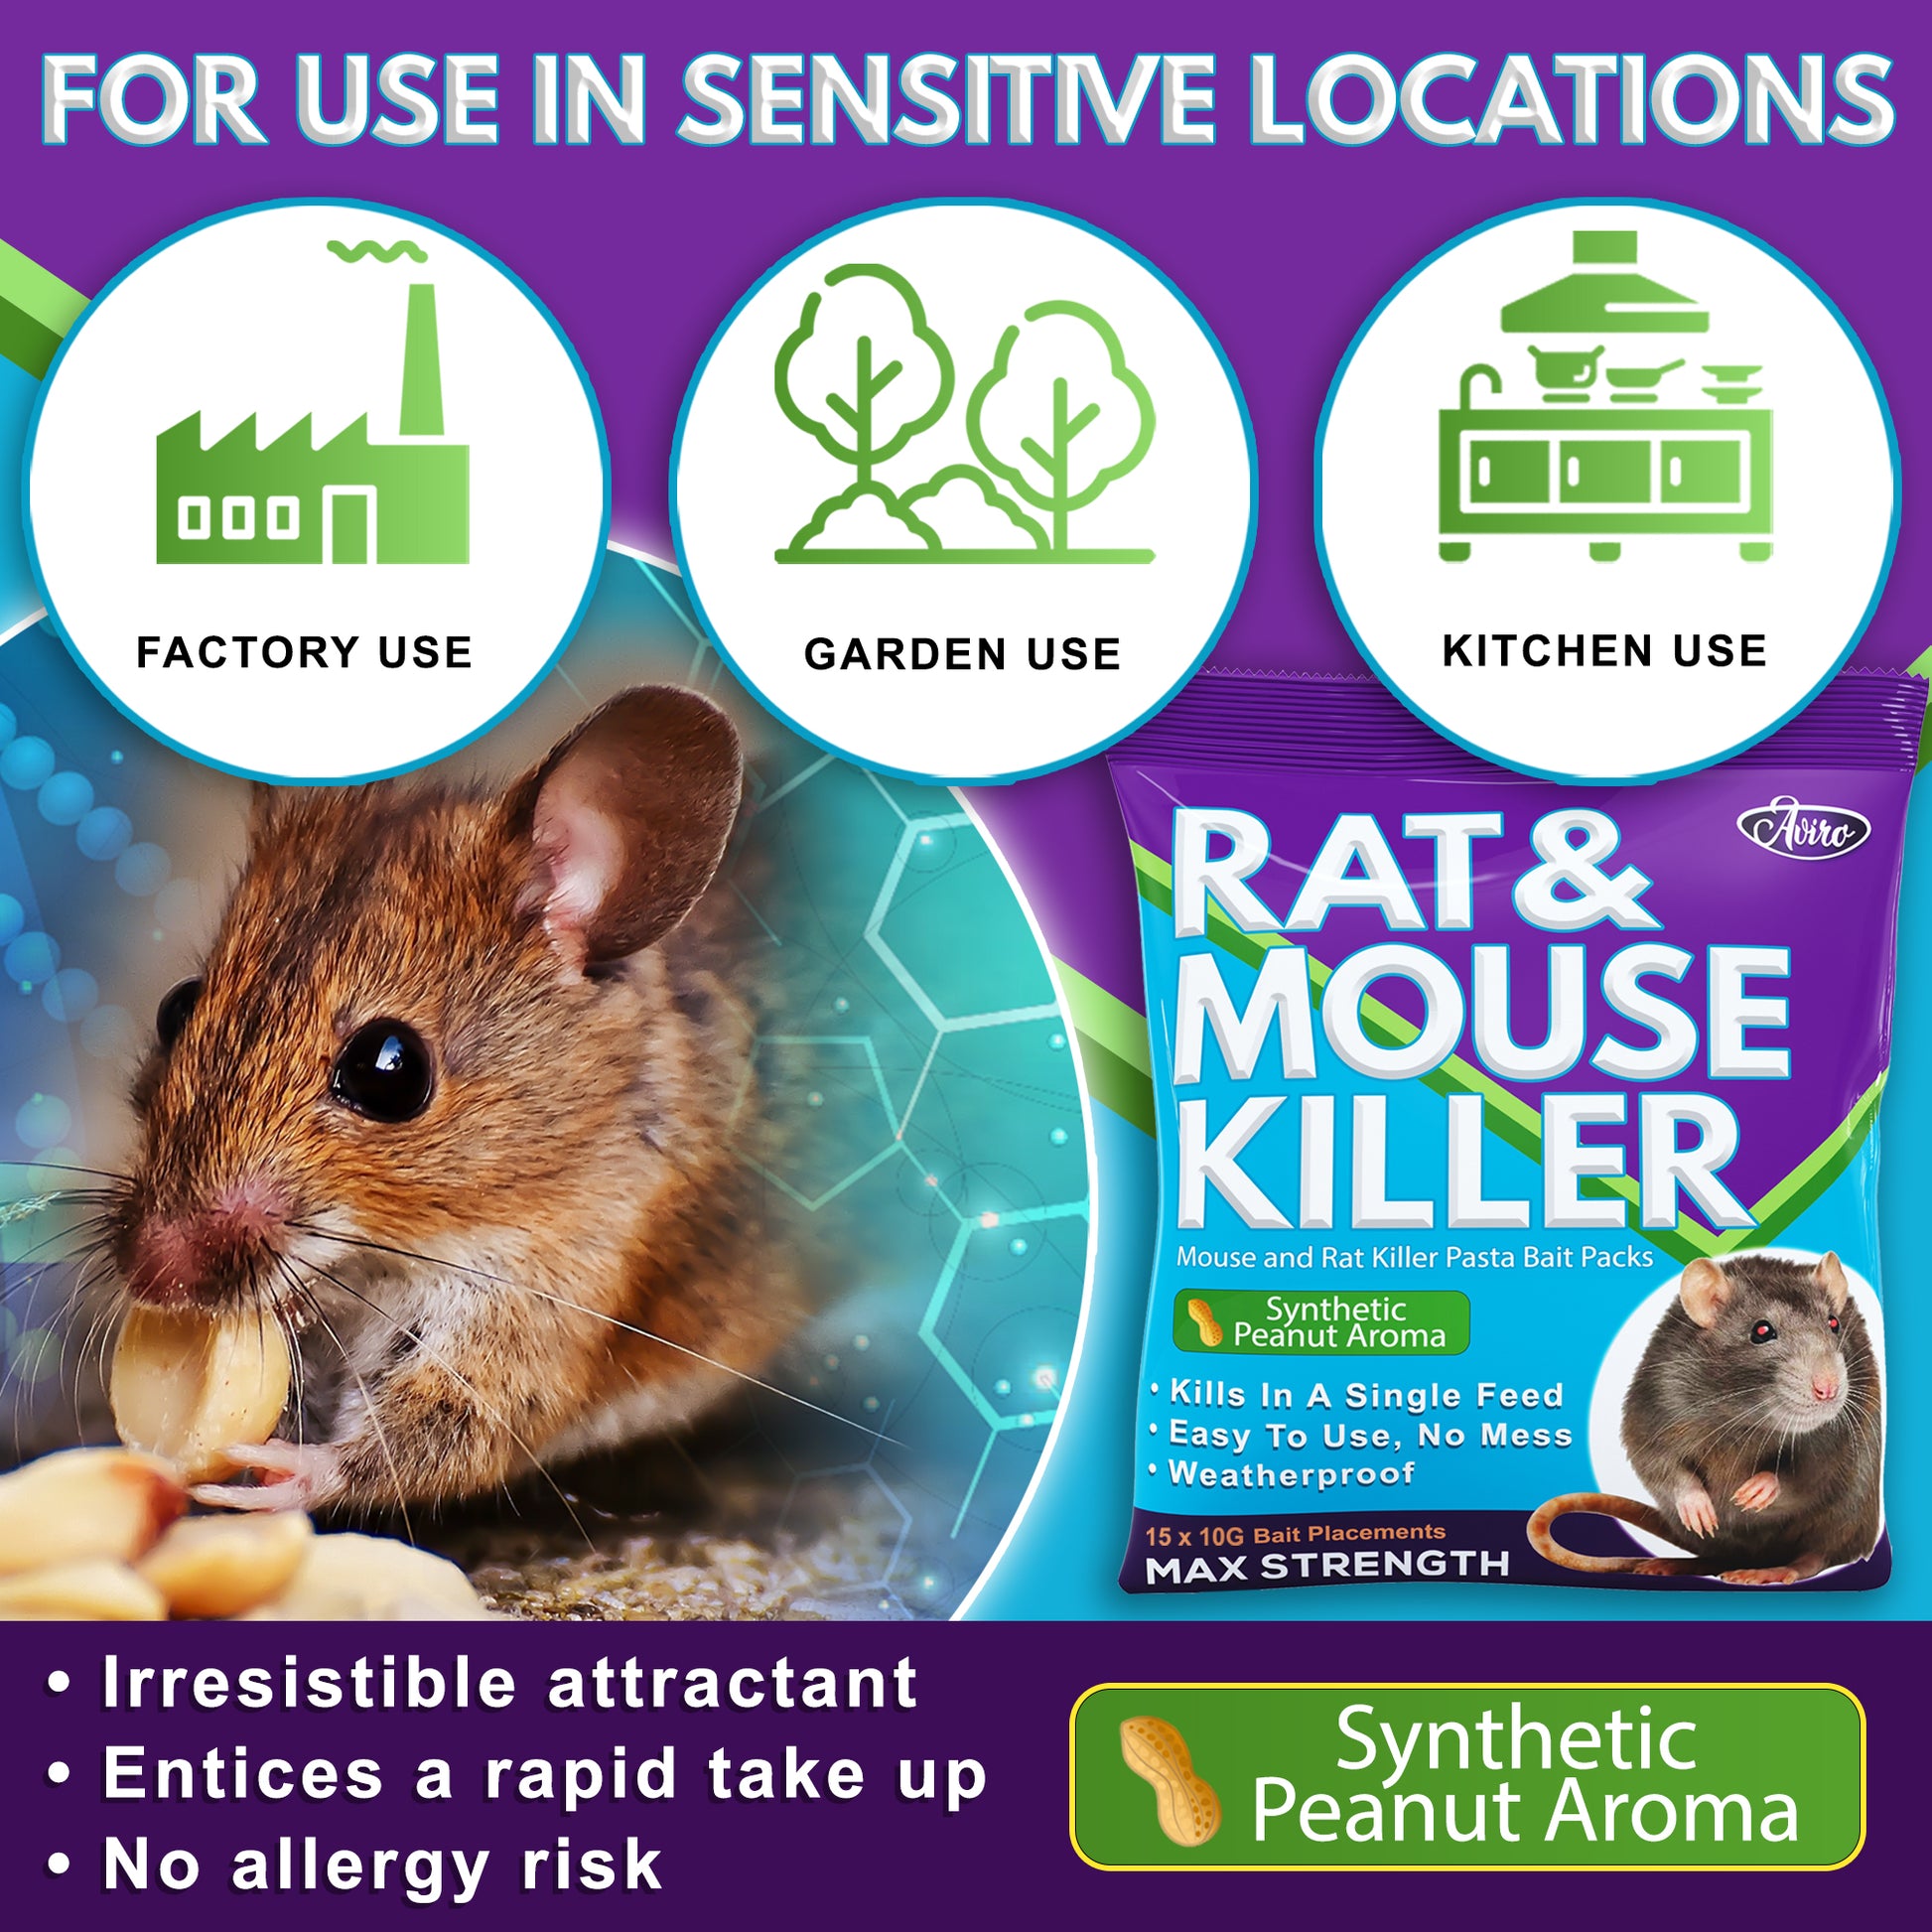 aviro-rat-and-mouse-killer-locations-used